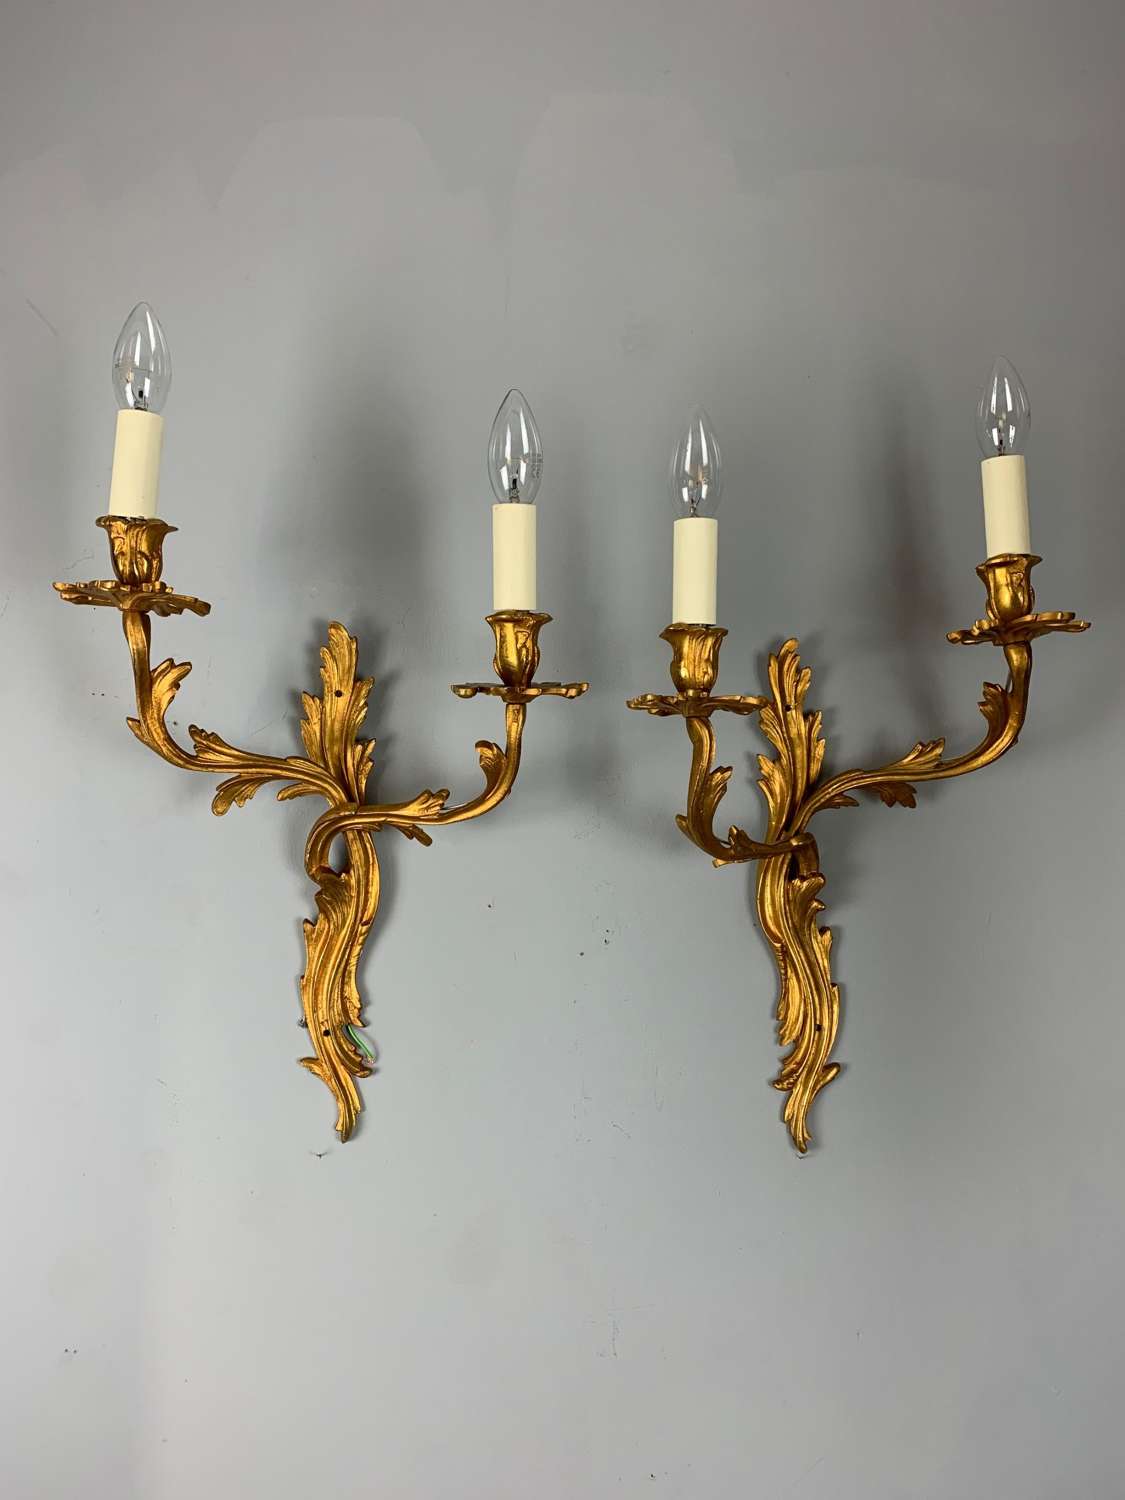 Large Pair Of Opposing French Rococo Gilt Bronze Antique Wall Lights